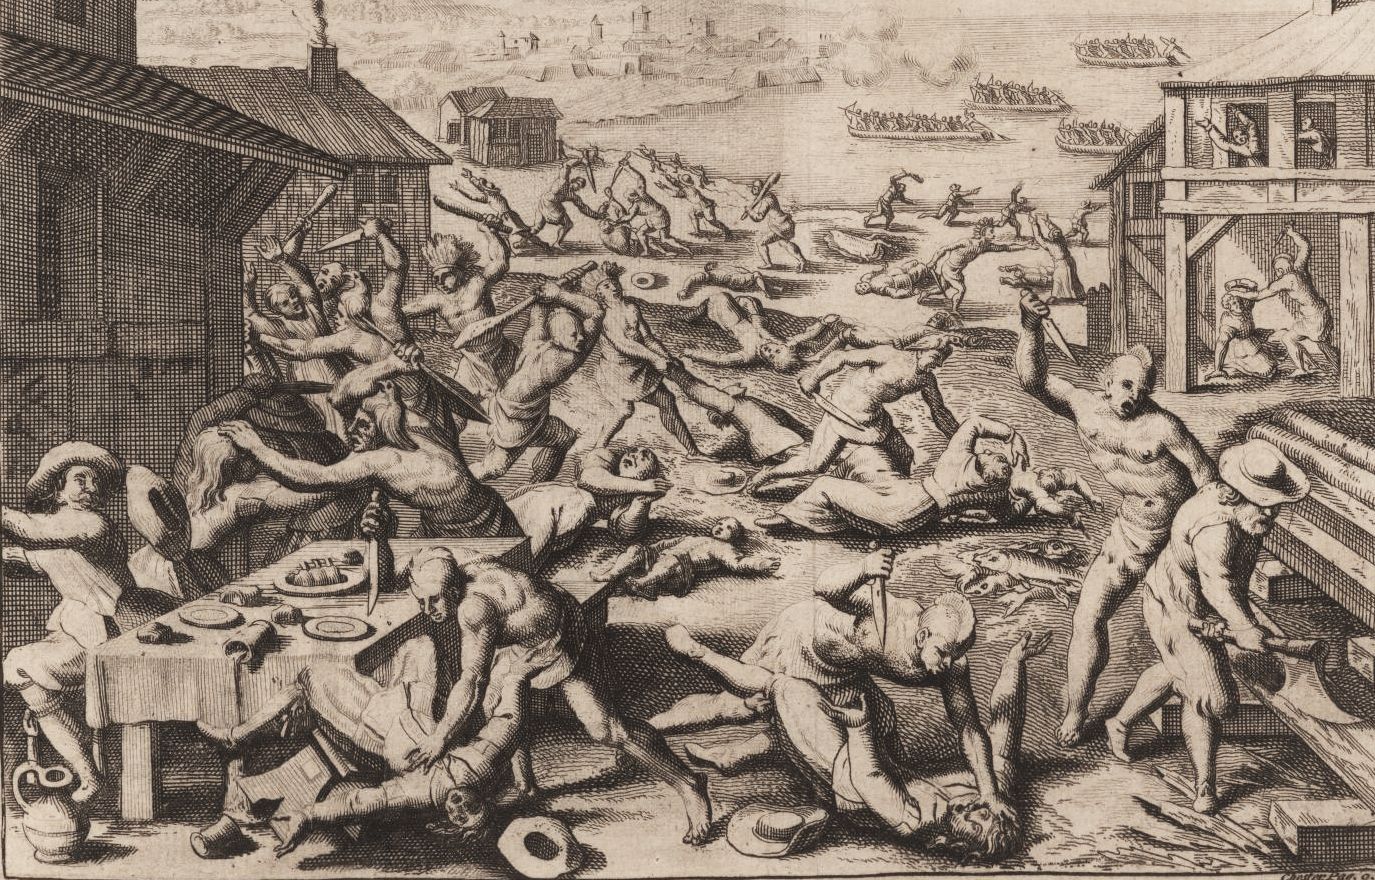 Theodor de Bry engraved a dramatic scene of Powhatan warriors attacking the Virigina settlement in 1622 while its inhabitants dine and work. Chief Opechancanough and his men entered Jamestown and once inside they massacred 347 English men and women. ©John Carter Brown Library, Providence, RI.